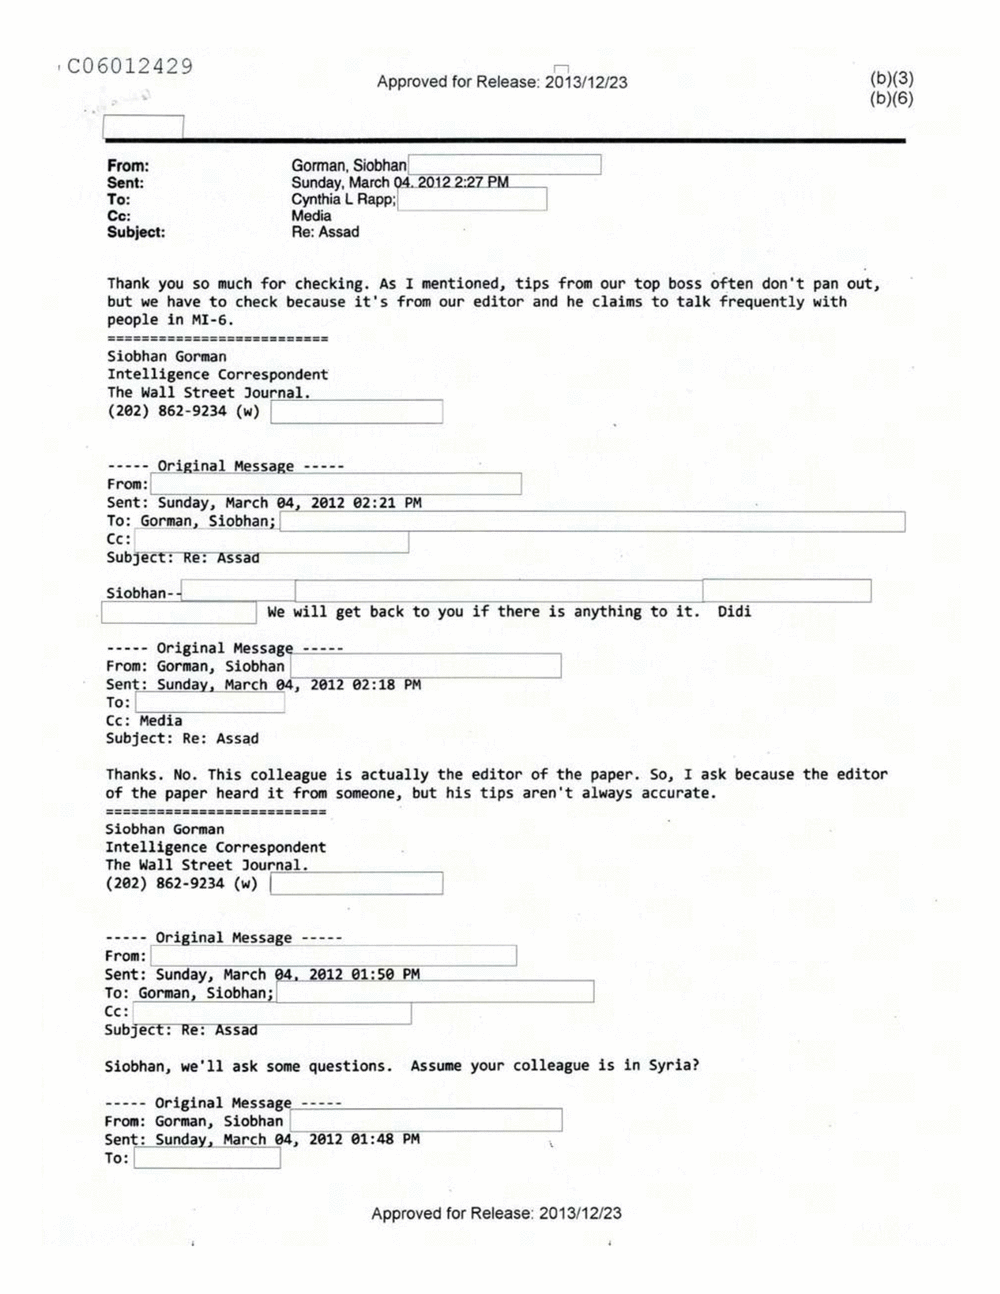 Page 4 from Email Correspondence Between Reporters and CIA Flacks